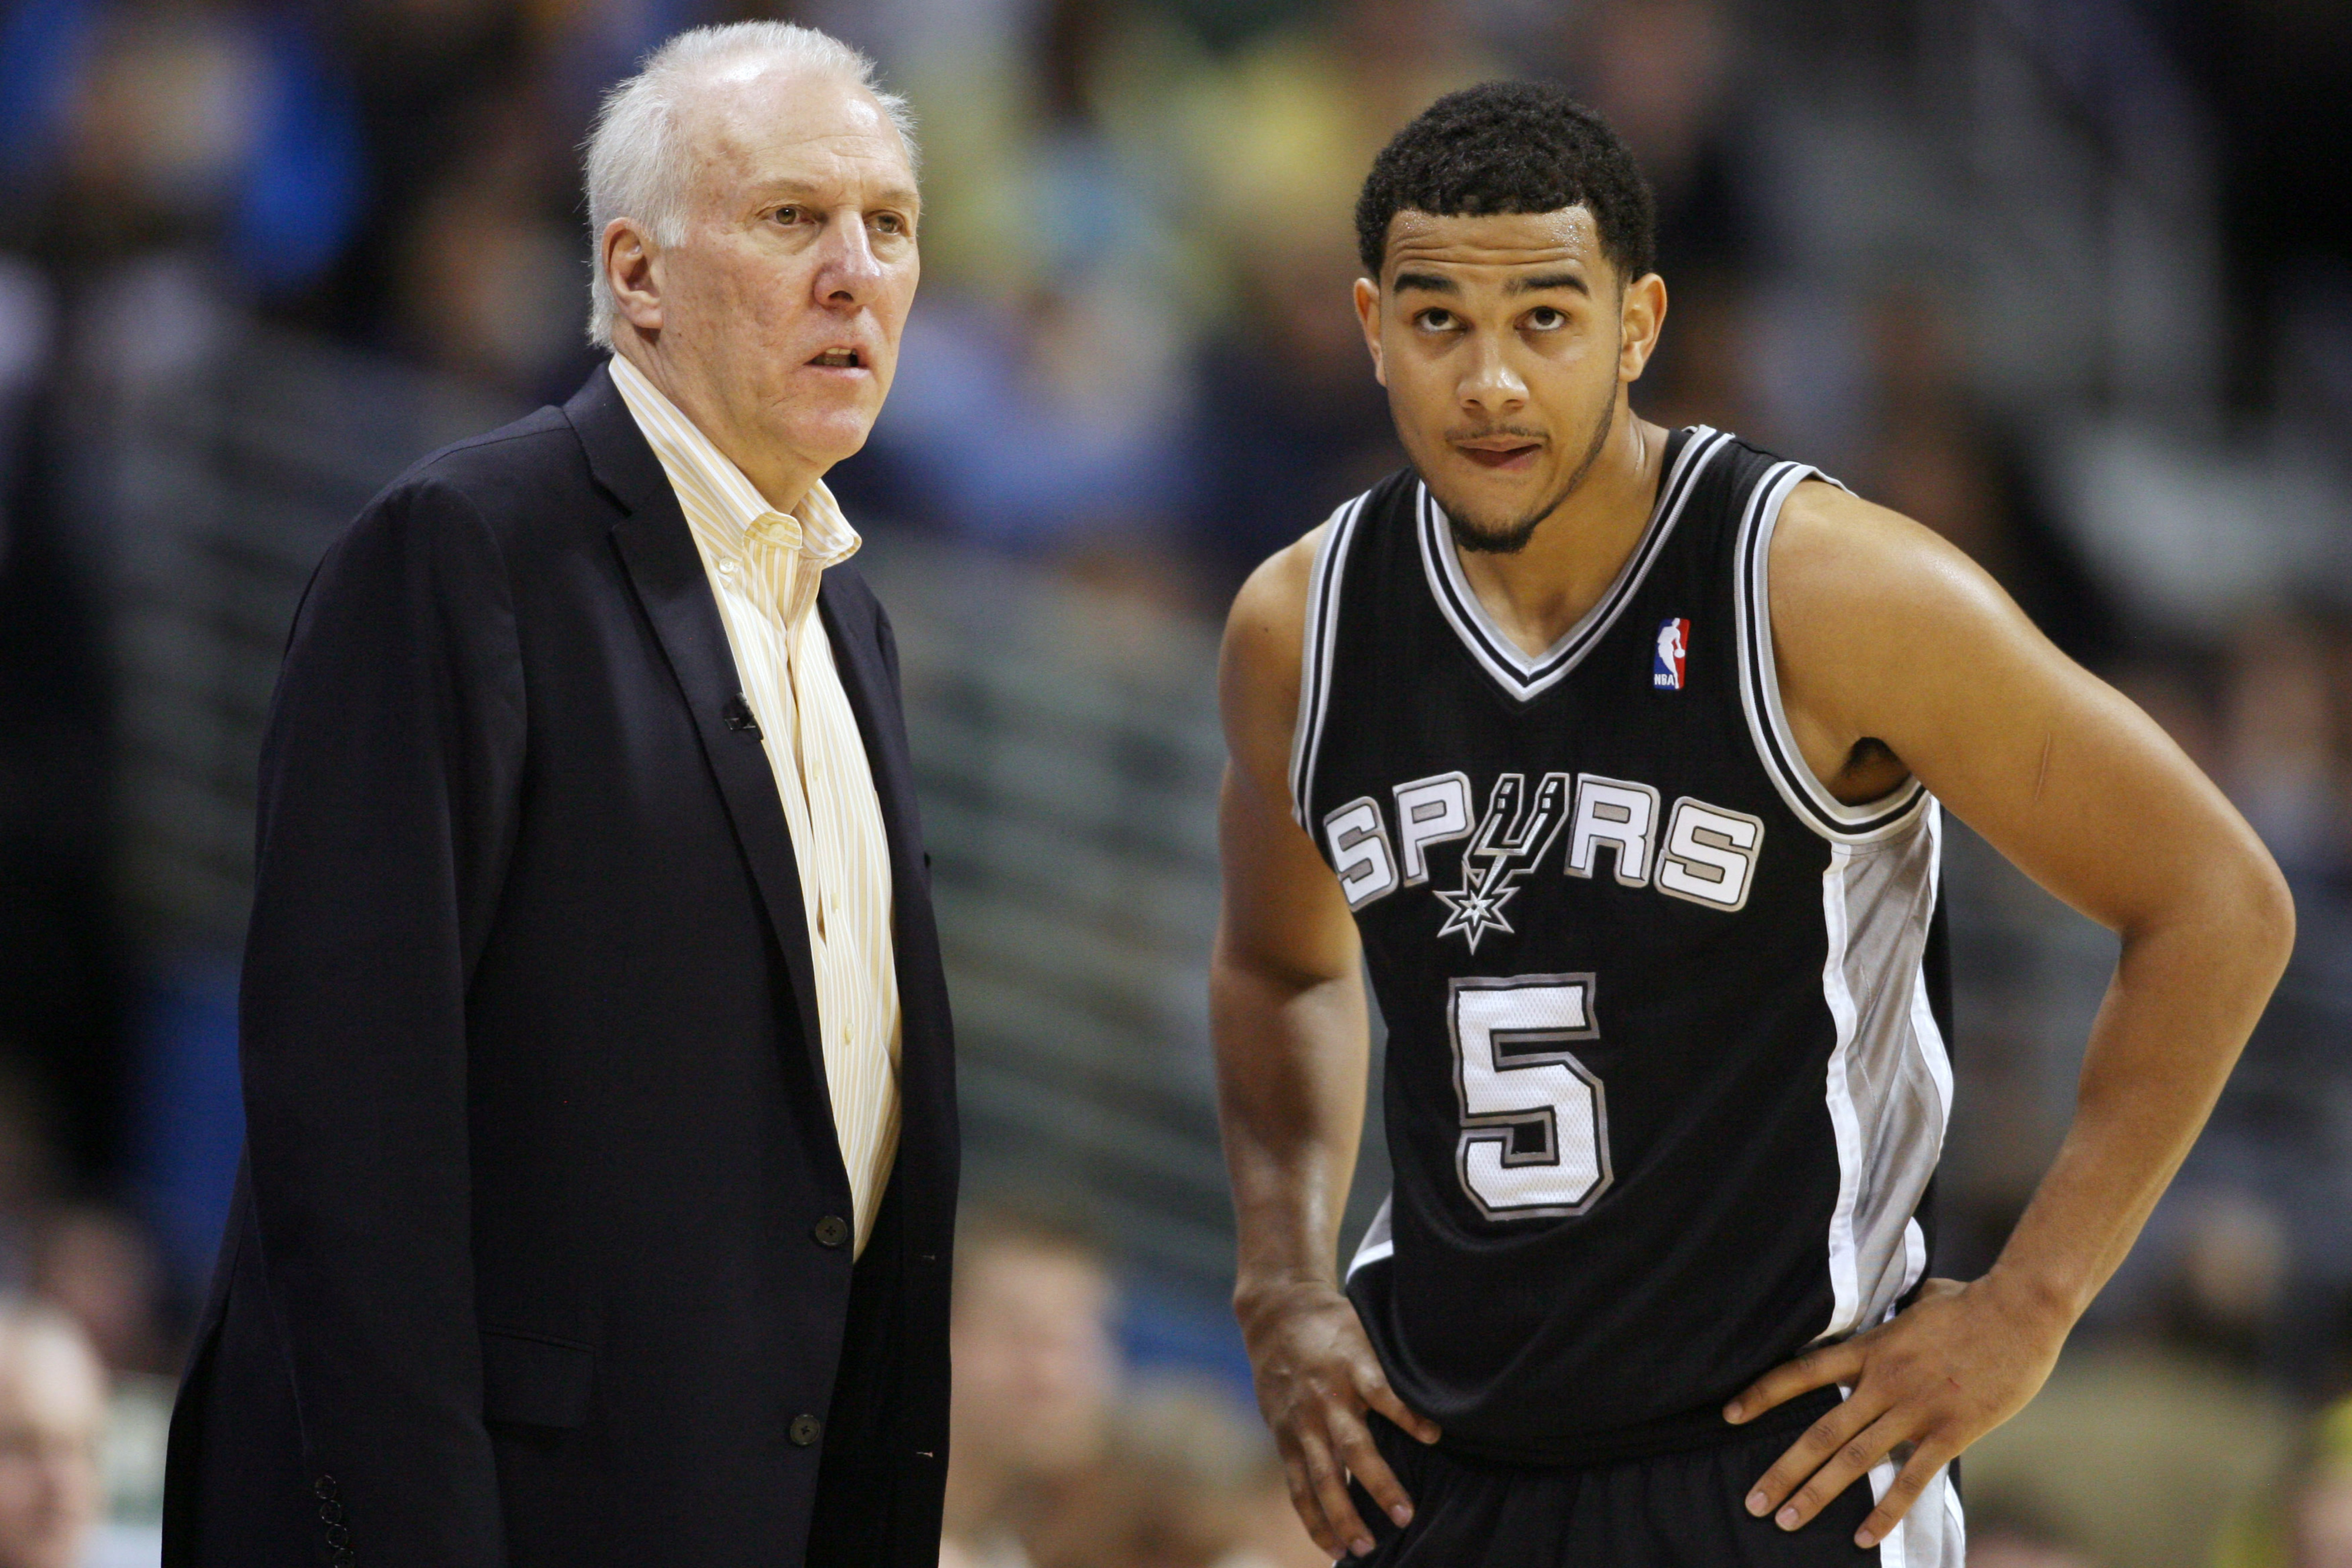 With Tony Parker likely hurt, could Cory answer the call from Popp?  We think so ... 